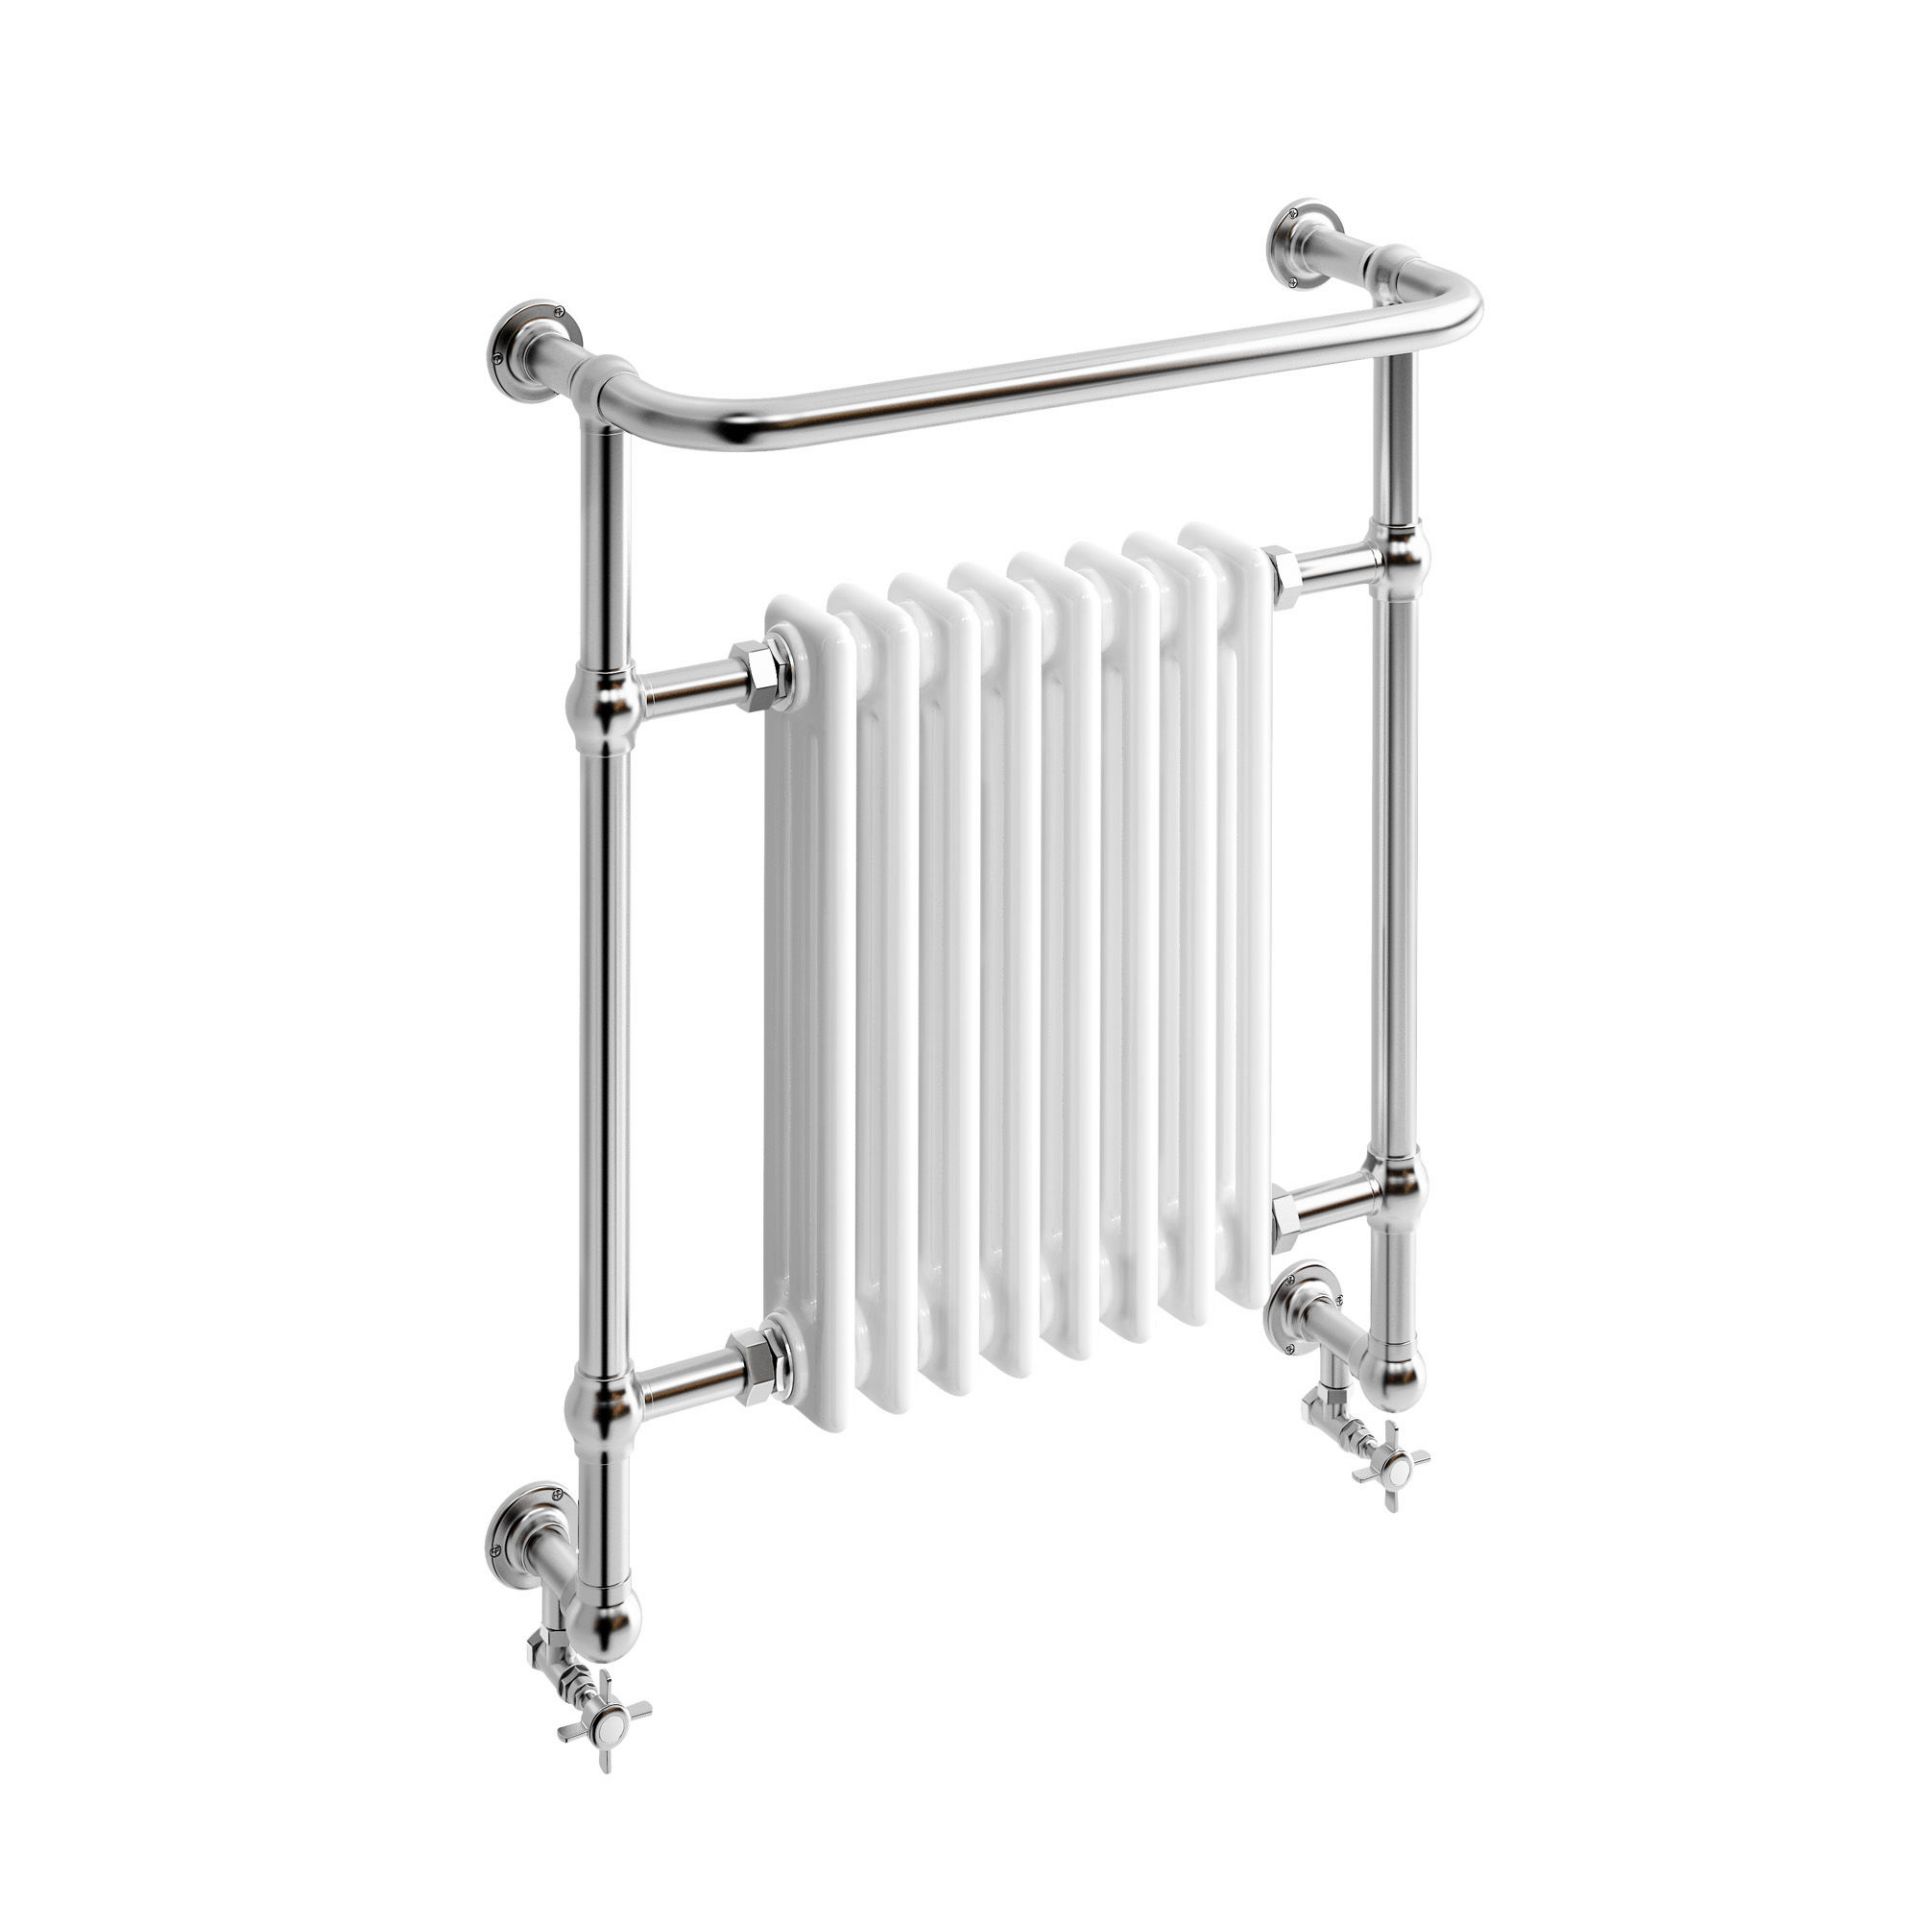 (XS322) 826x659mm Traditional White Wall Mounted Towel Rail Radiator - Cambridge. RRP £342.99. - Image 3 of 3